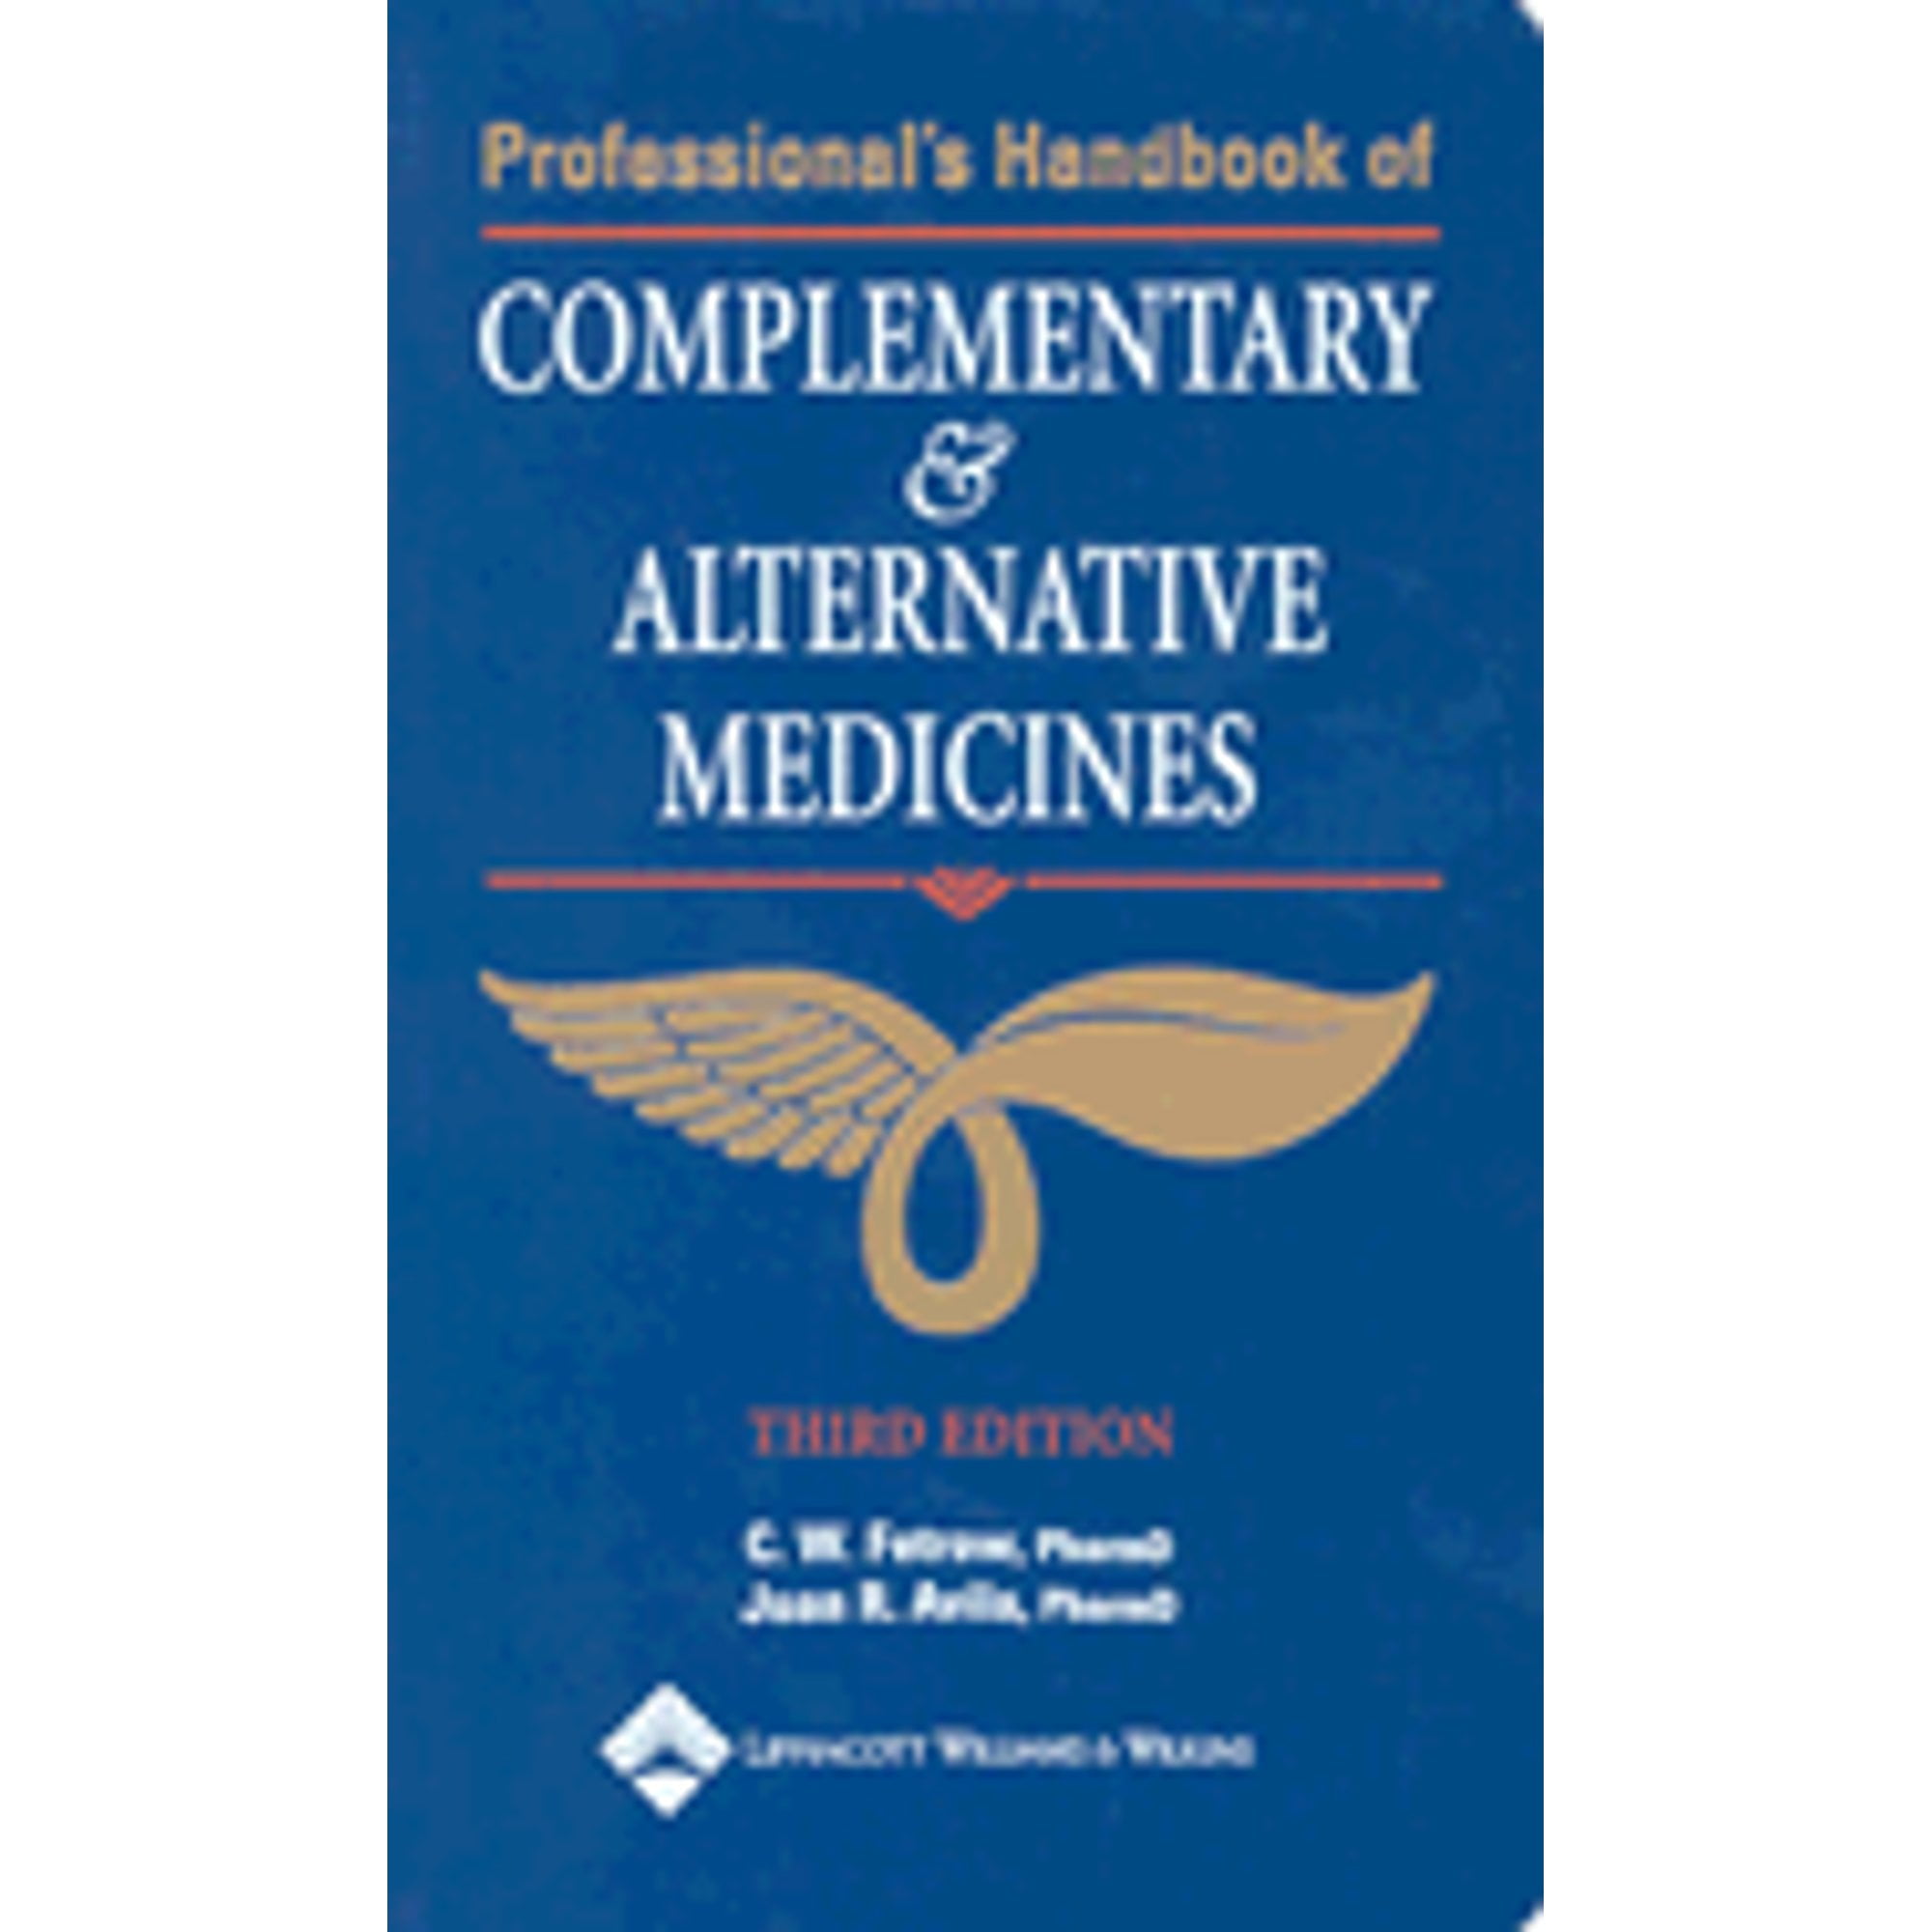 Pre-Owned Professional's Handbook of Complementary and Alternative Medicines (Paperback 9781582552439) by Charles W. Fetrow, Juan R. Avila